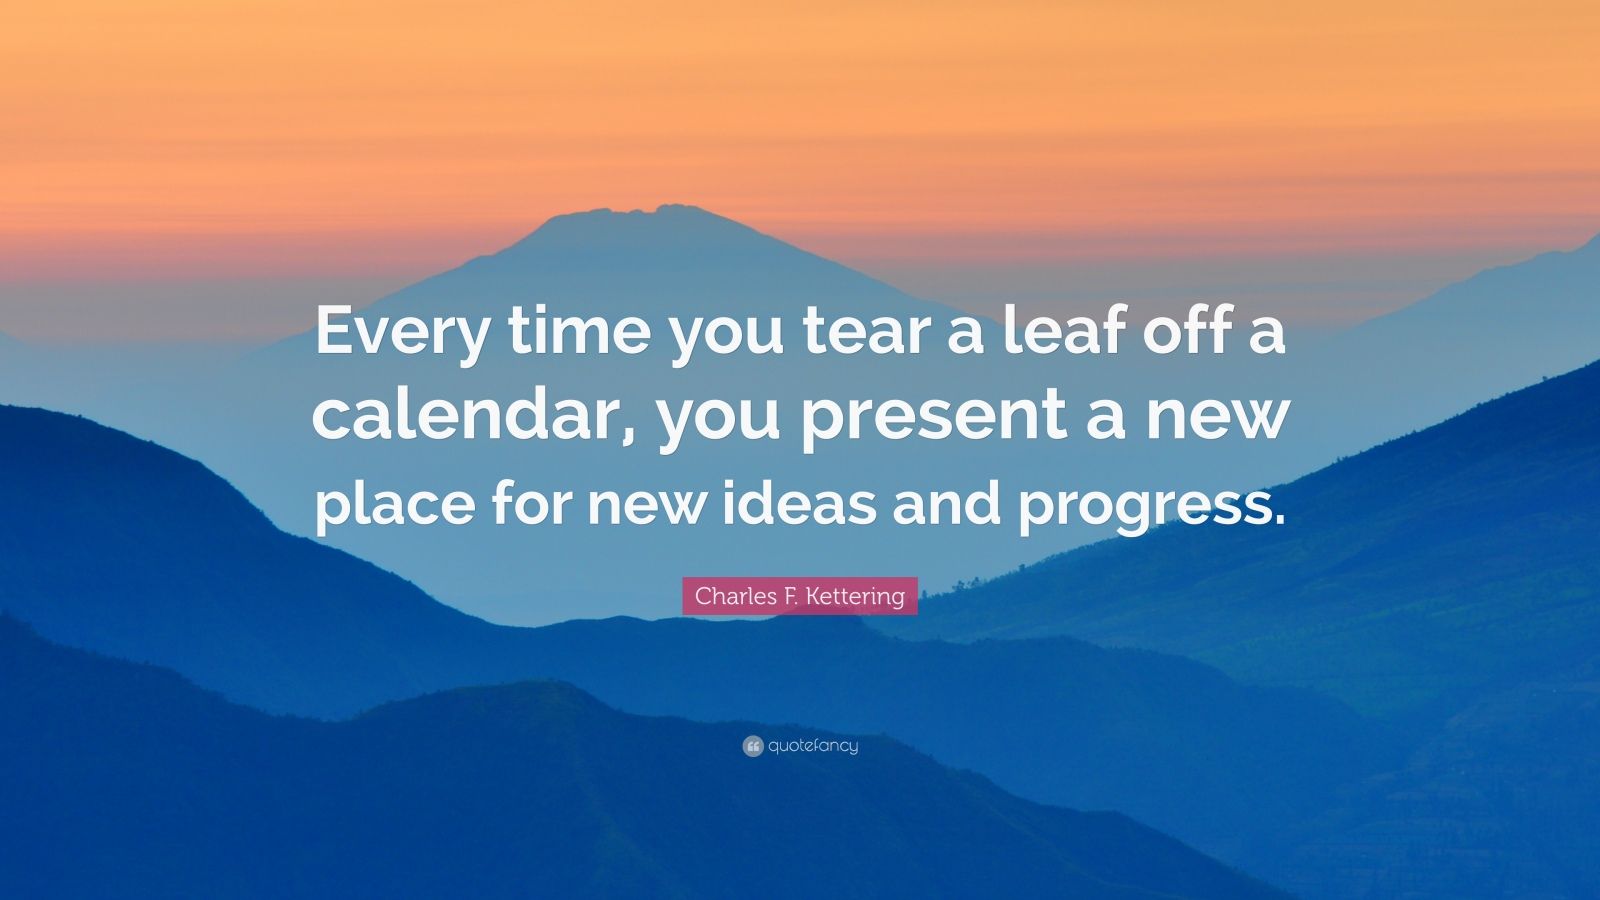 Charles F. Kettering Quote “Every time you tear a leaf off a calendar